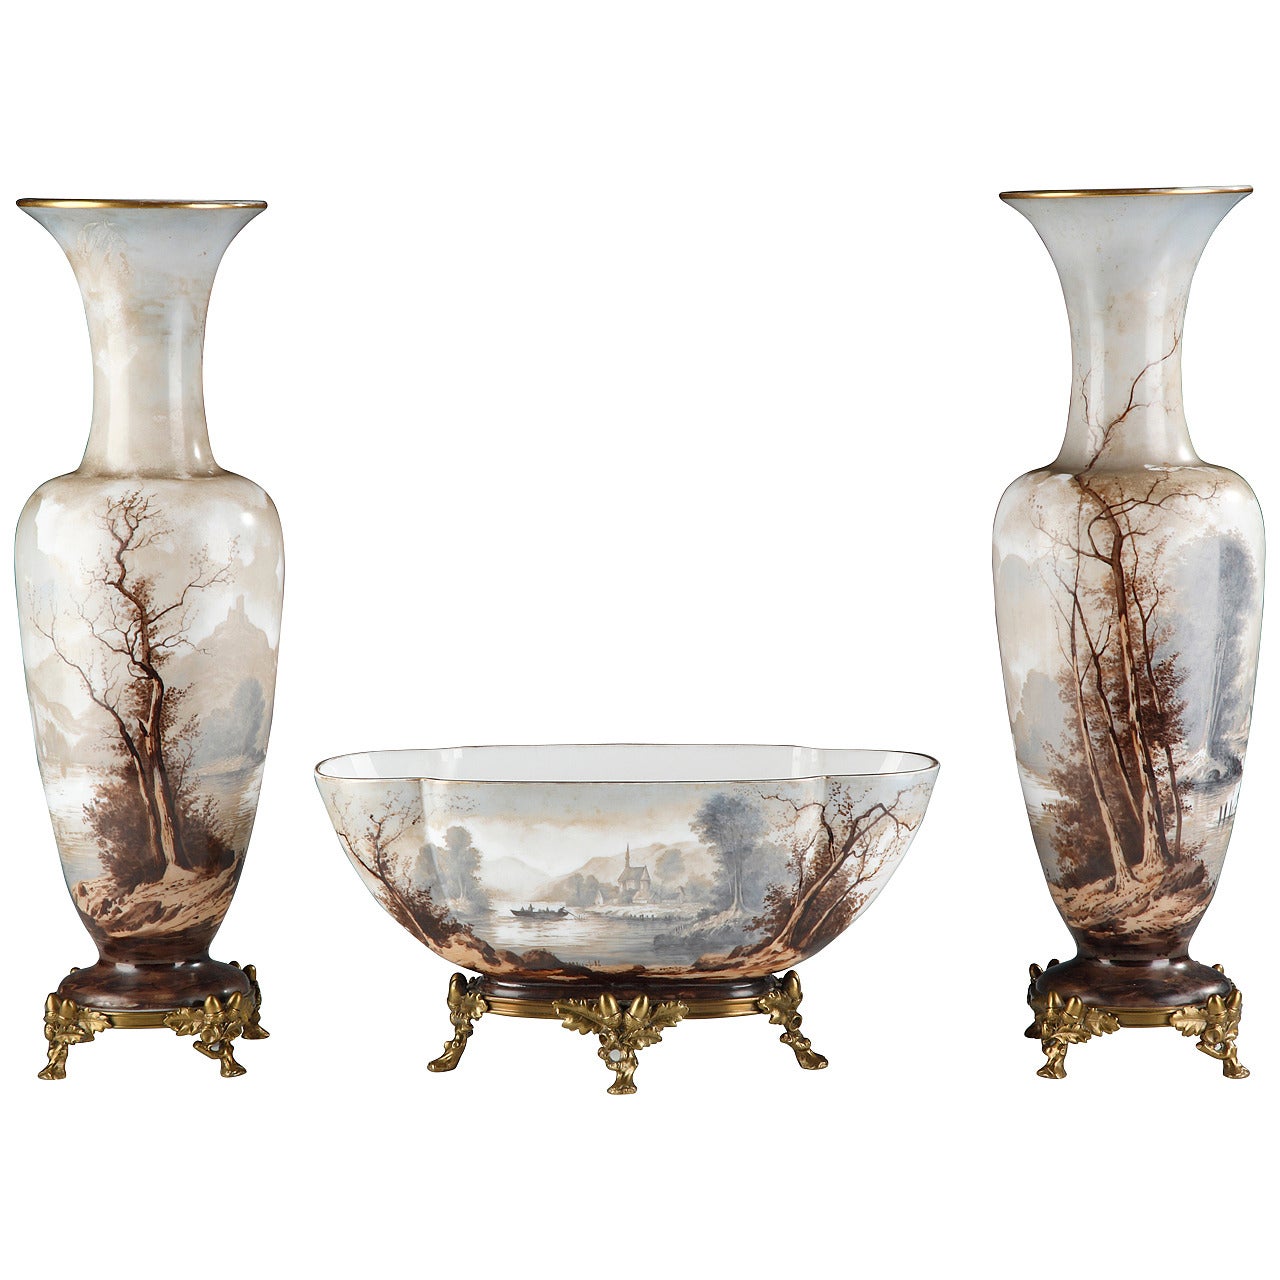 Exceptional Baccarat Set, Signed and Dated, 1883 For Sale